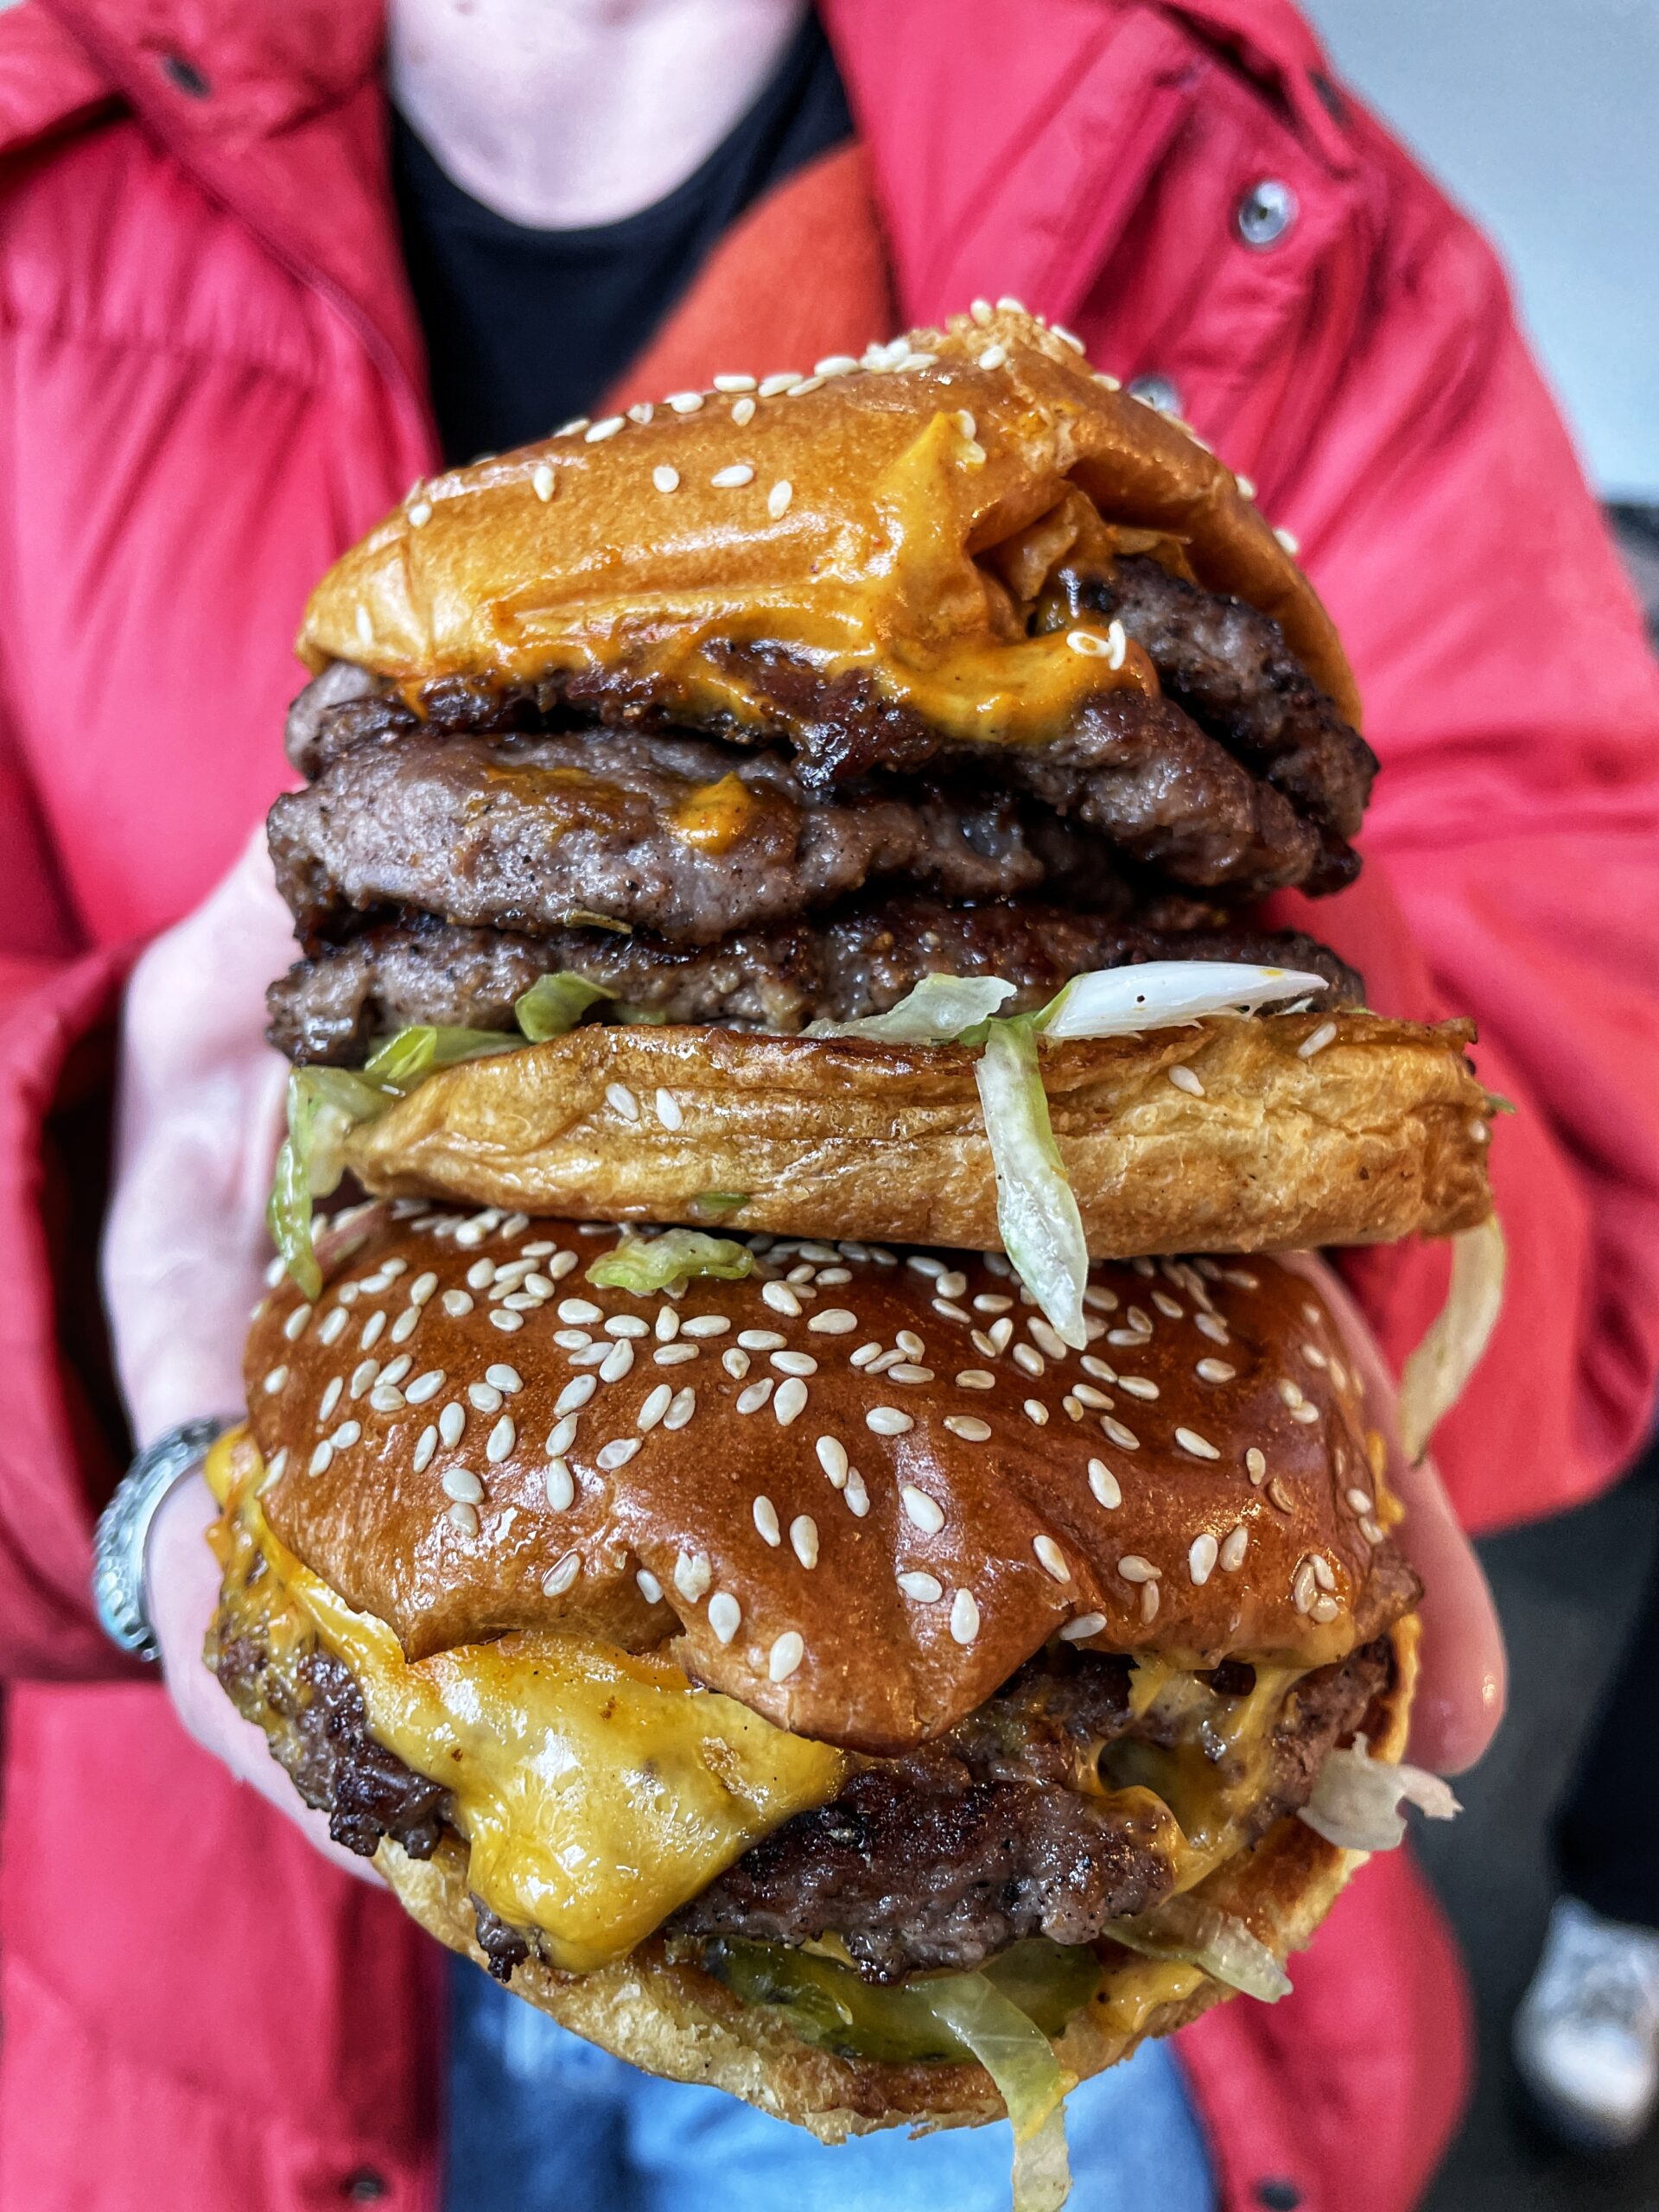 Burgerism in Greater Manchester has been named the seventh best burger in Britain. Credit: The Manc Group